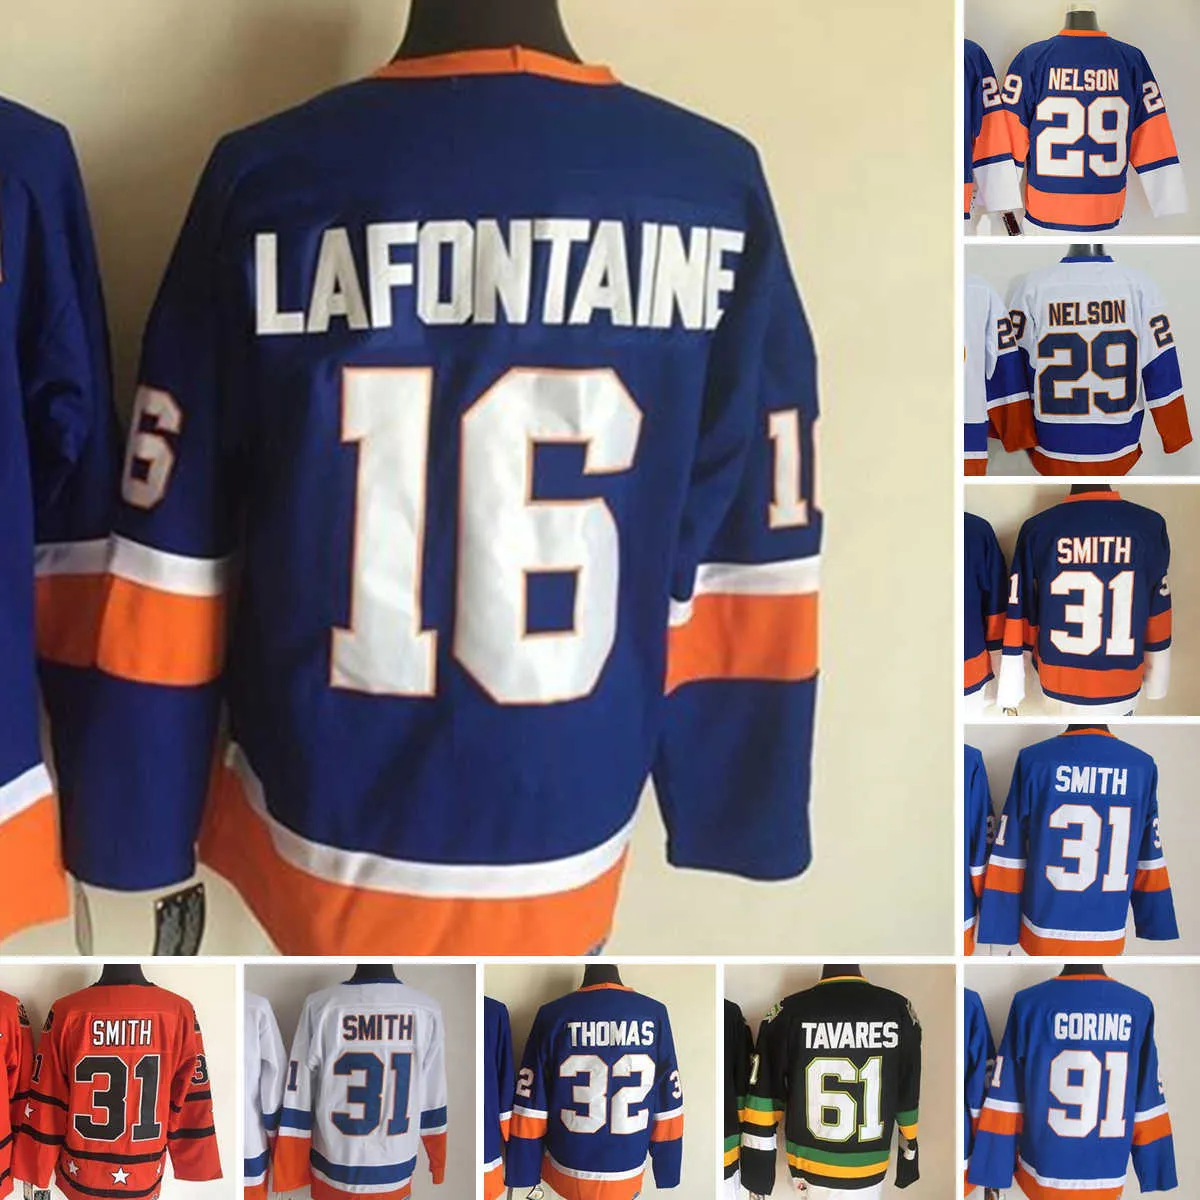 1997-1999 Film Retro CCM Hockey Jersey Broderie 31 Maillots Billy Smith 29 Brock Nelson 32 Steve Thomas 91 John Tavares 16 Maillots Vintage Pat LaFontaine